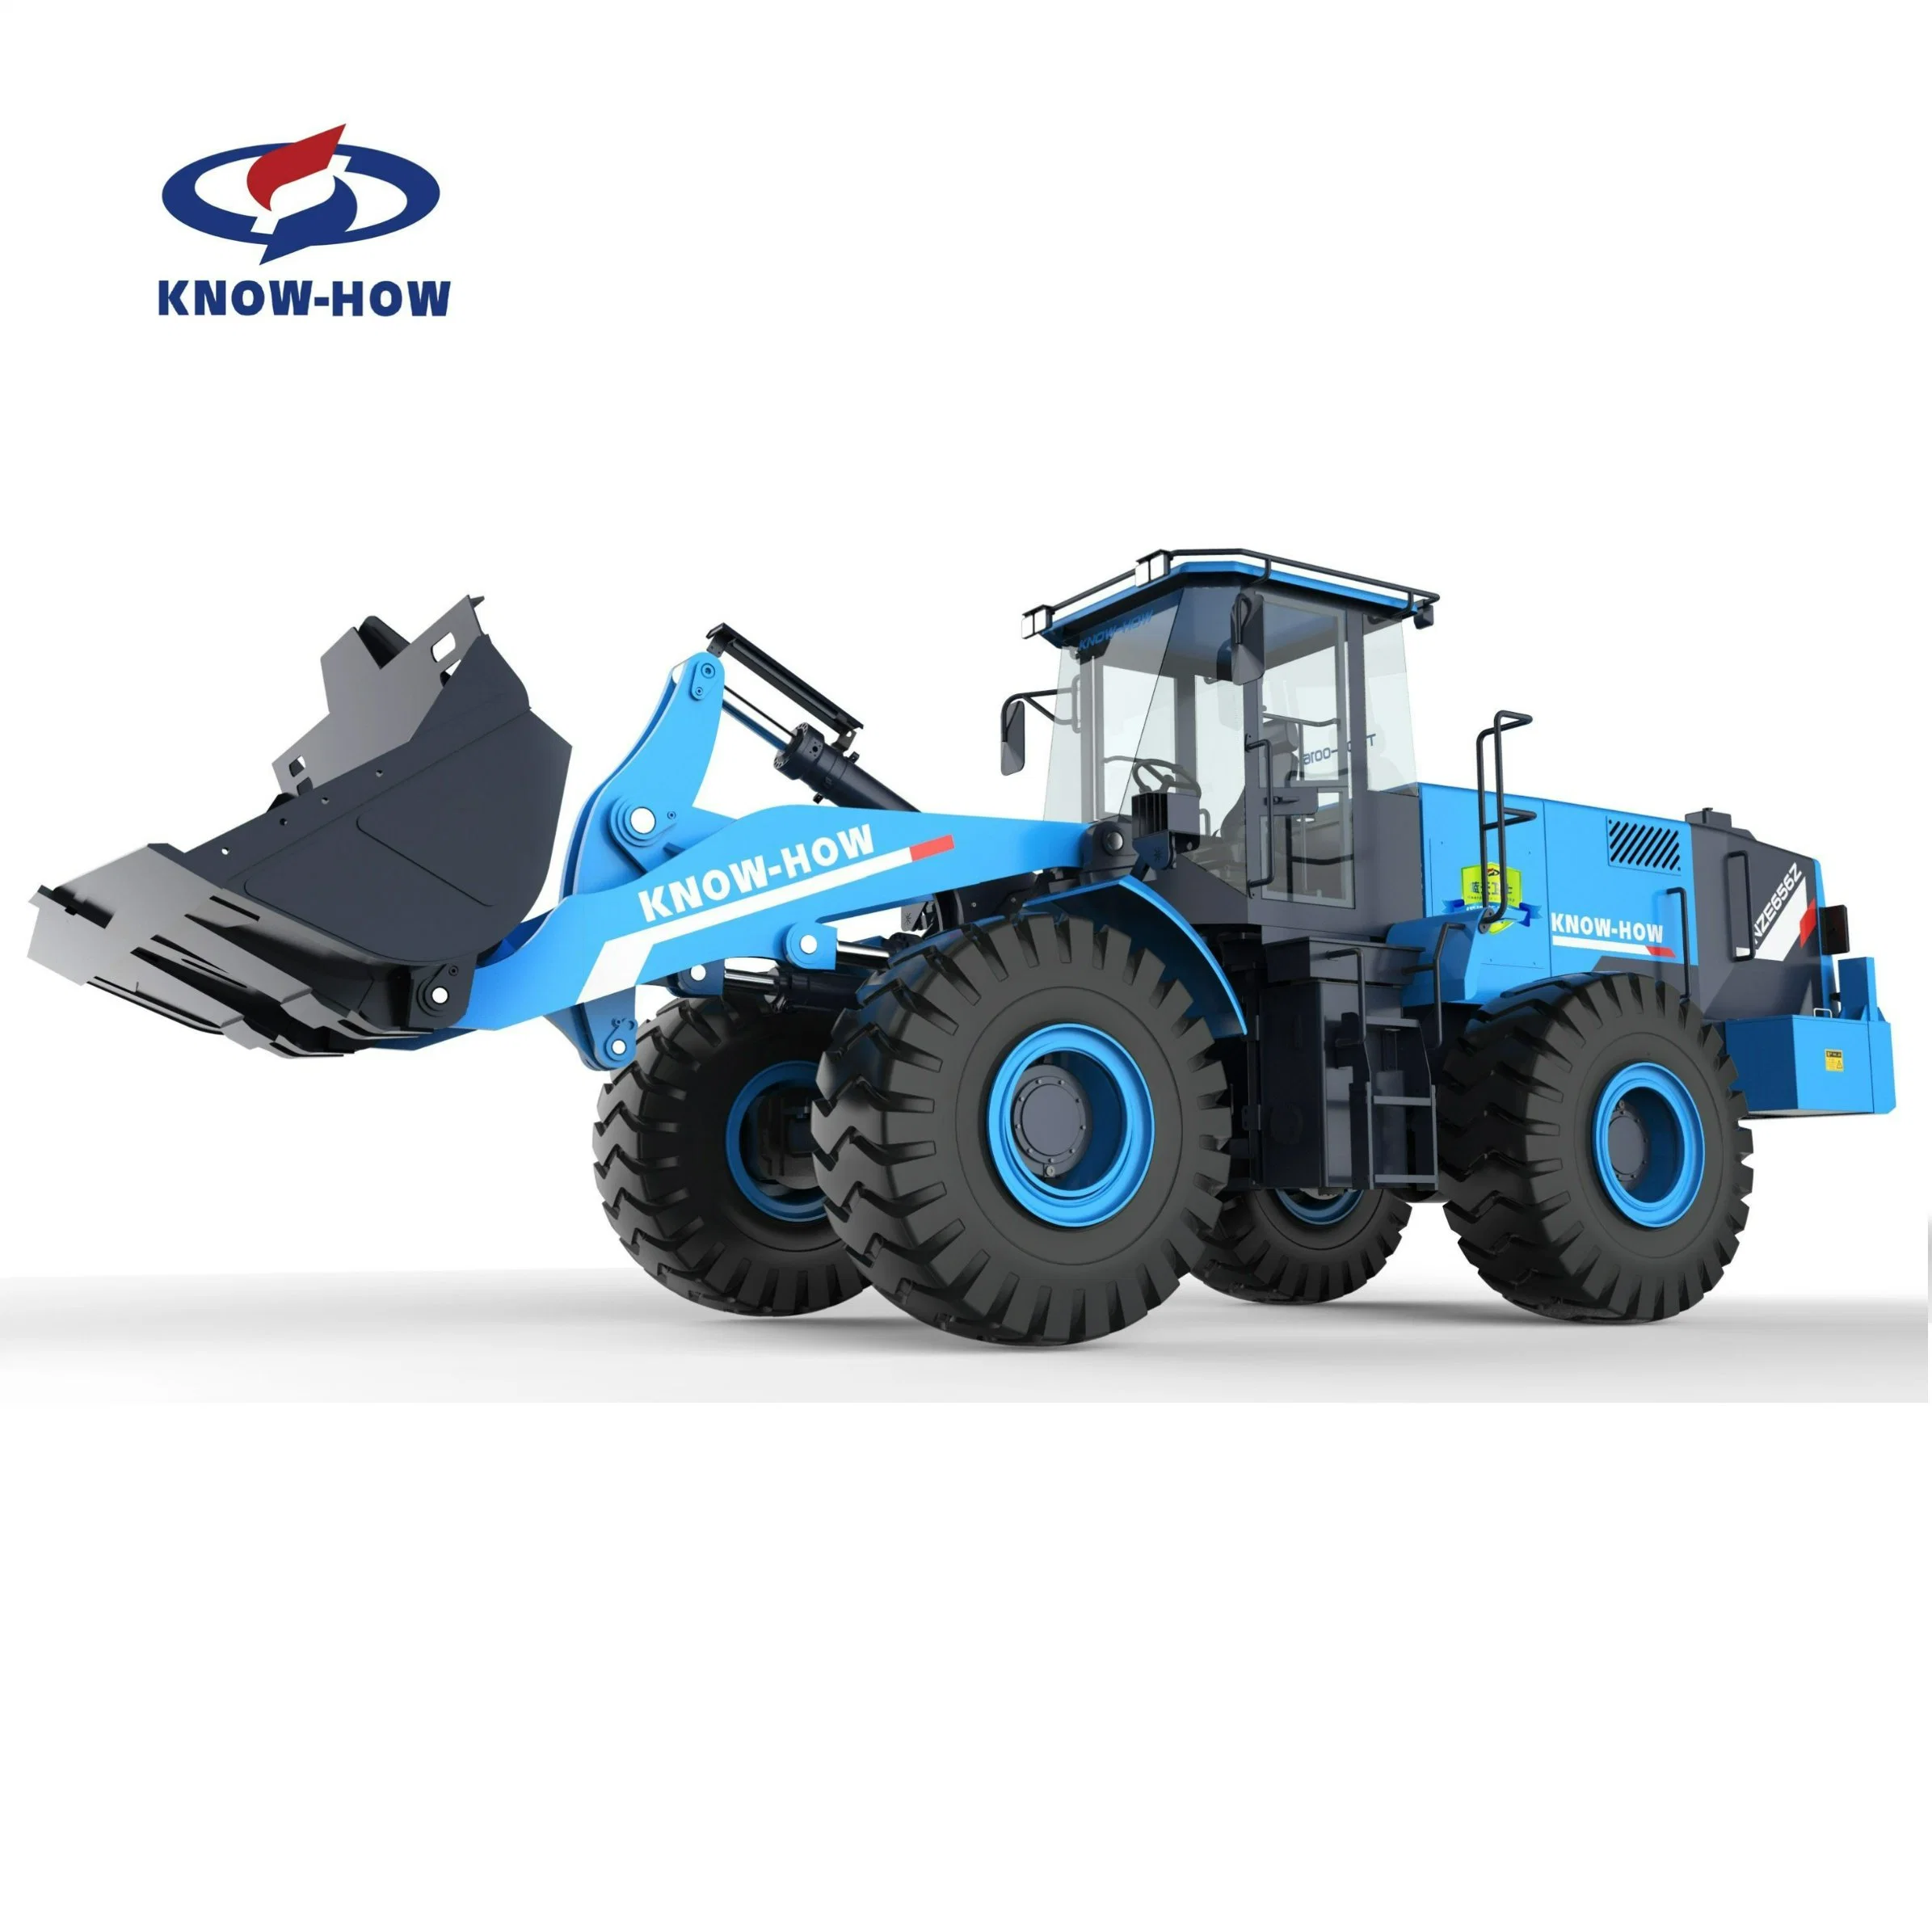 2 Years Quanlity Warranty Service Know-How Nze65f New Model Backhoe Front End Wheel Loaders Mining Loader